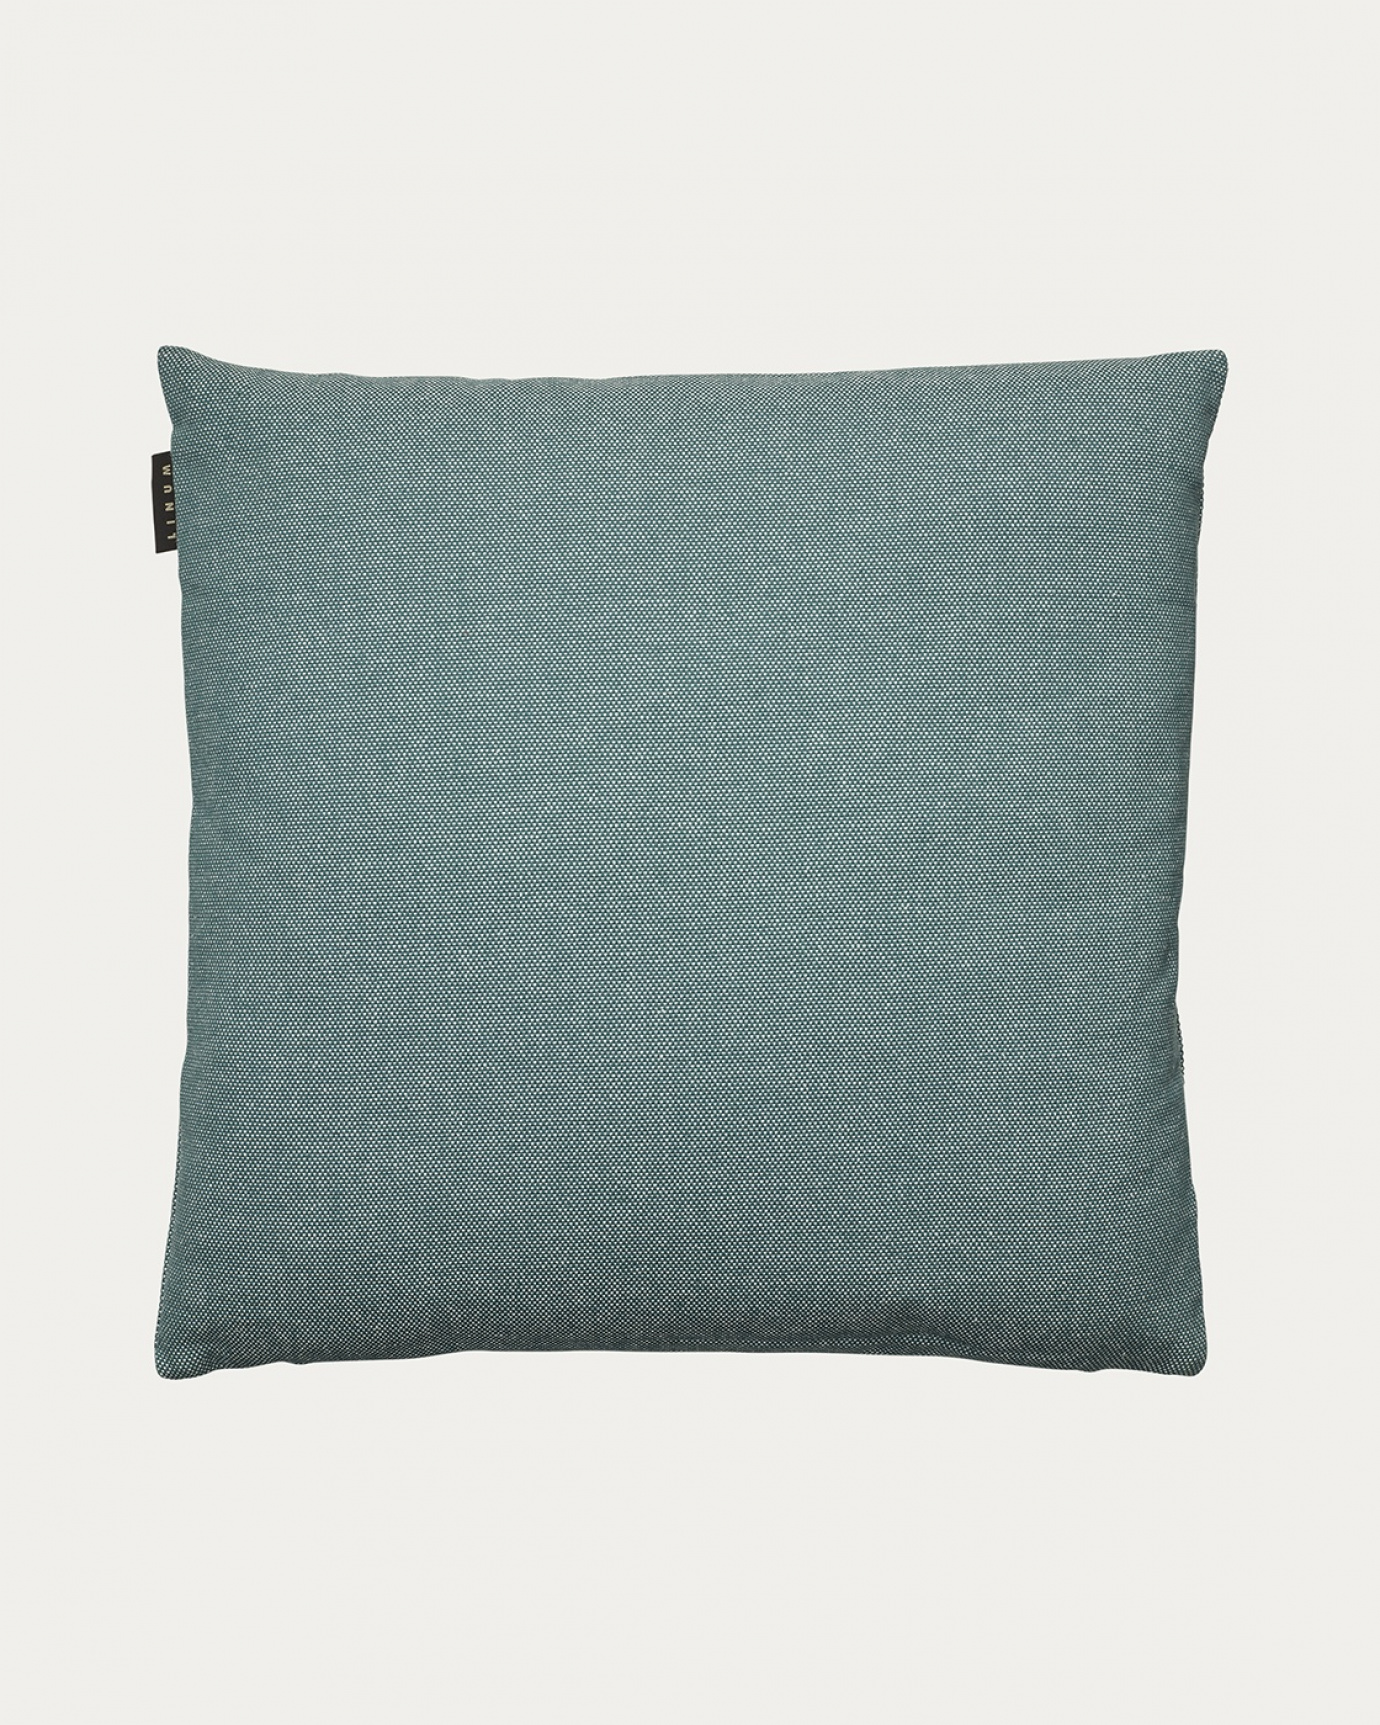 Product image dark grey turquoise PEPPER cushion cover made of soft cotton from LINUM DESIGN. Easy to wash and durable for generations. Size 50x50 cm.